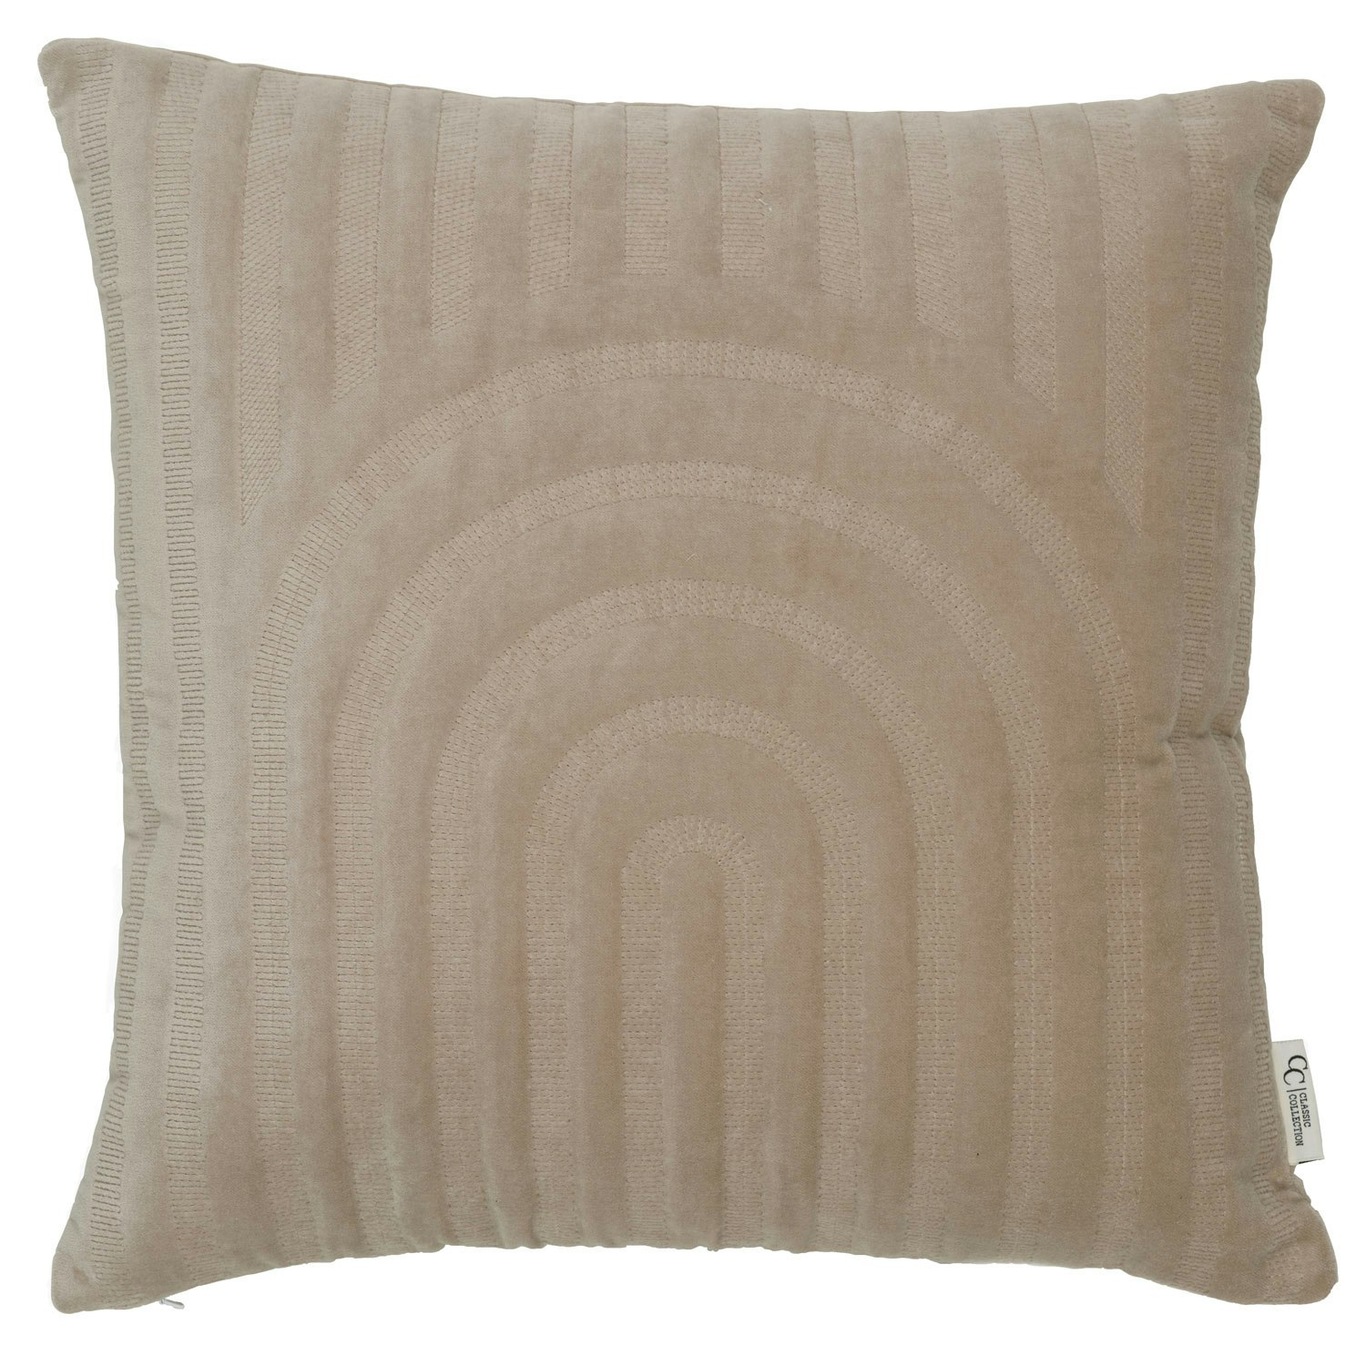 Arch Kussenhoes 50x50 cm, Taupe